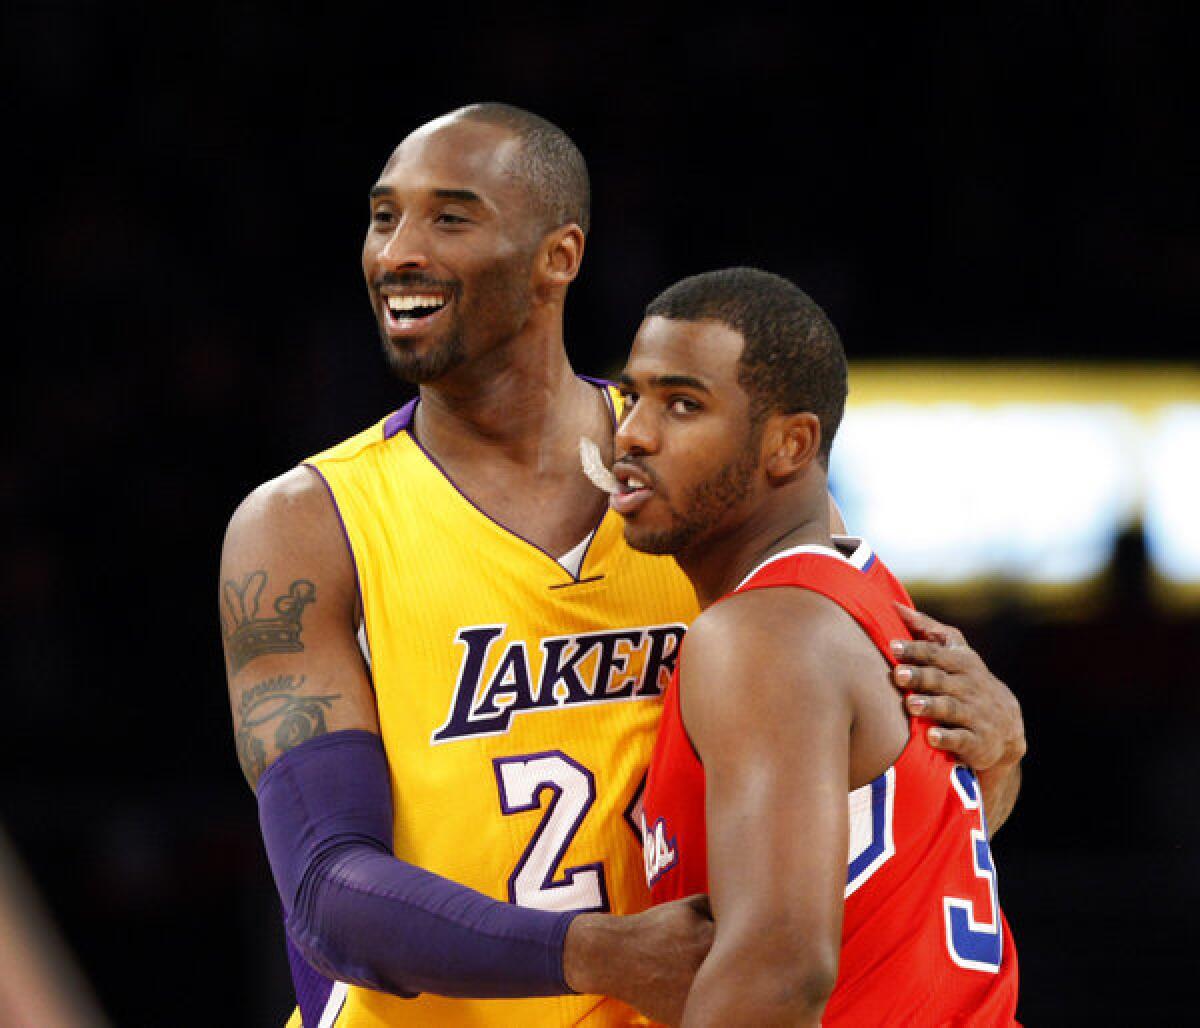 Lakers guard Kobe Bryant and Clippers guard Chris Paul embrace before a Nov. 6, 2013, exhibition game at Staples Center.